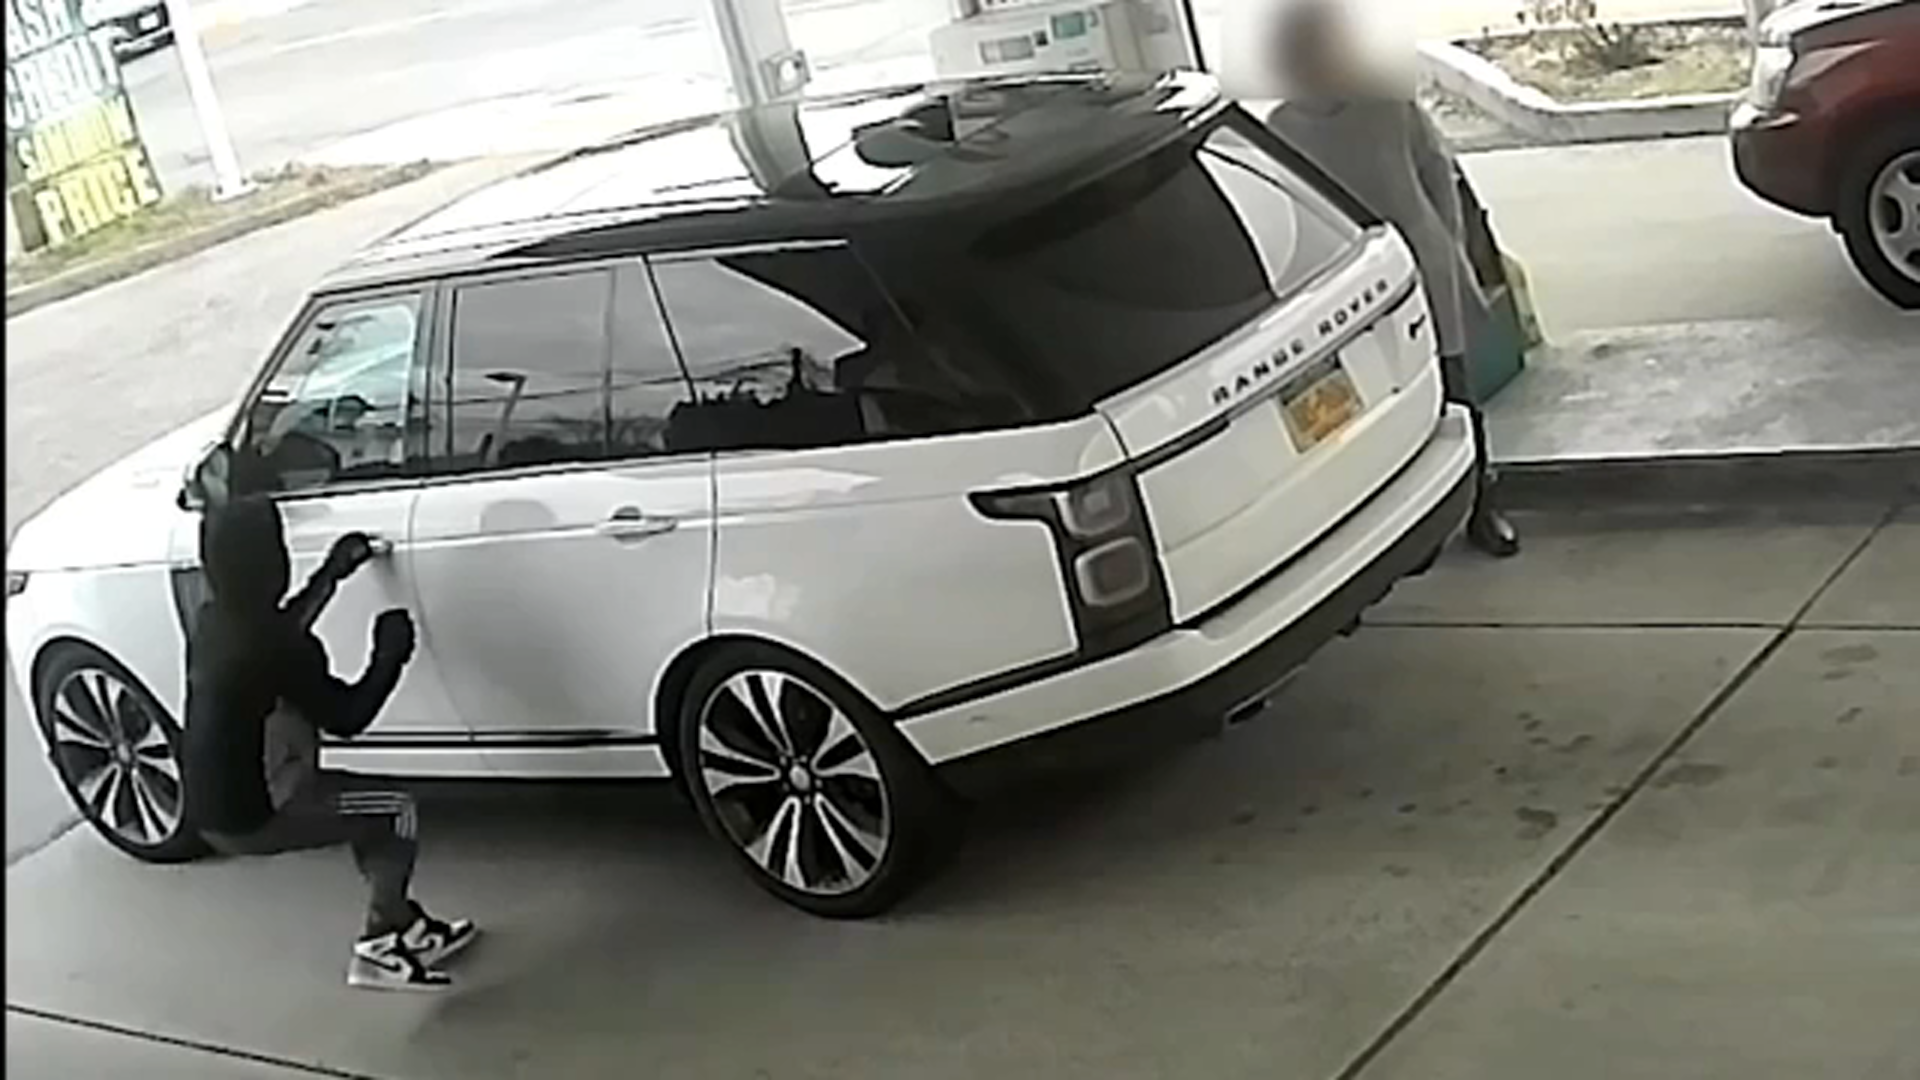 Small dog dragged during Range Rover theft at gas pump on Long Island